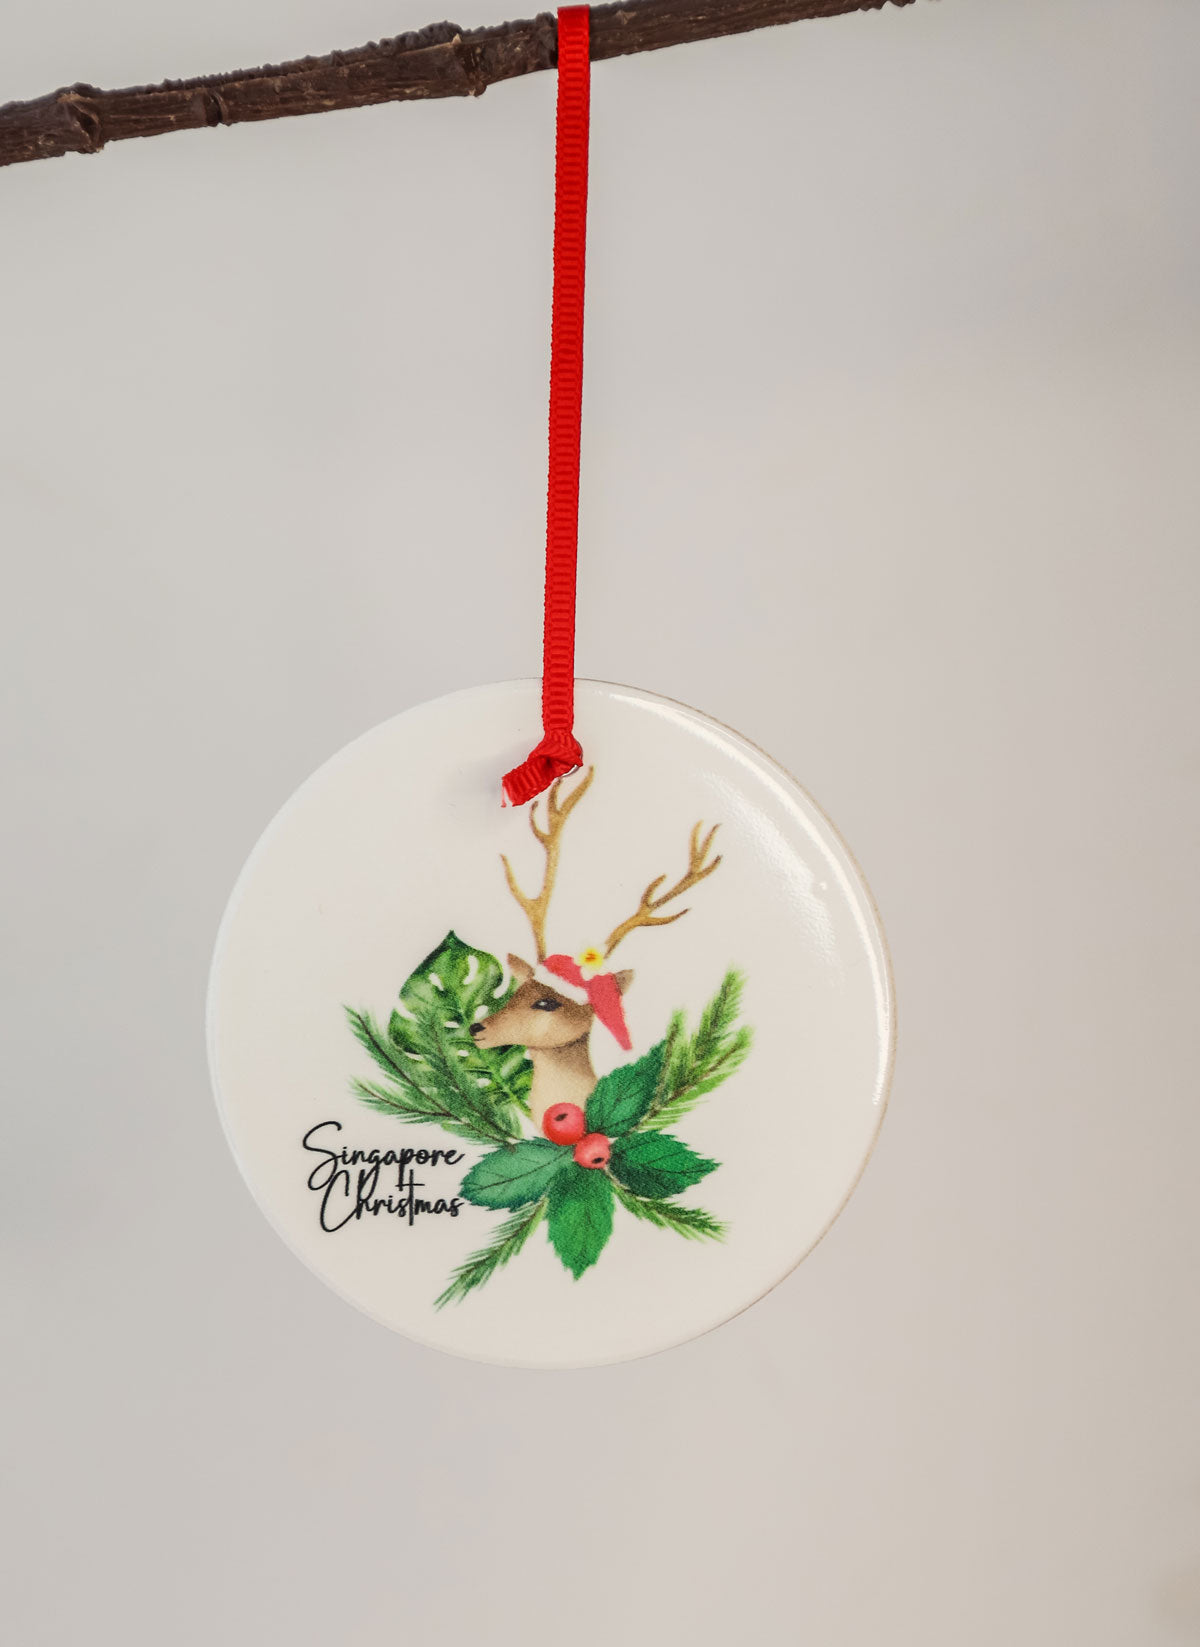 Reindeer in Tropical Foliage Christmas Ornament